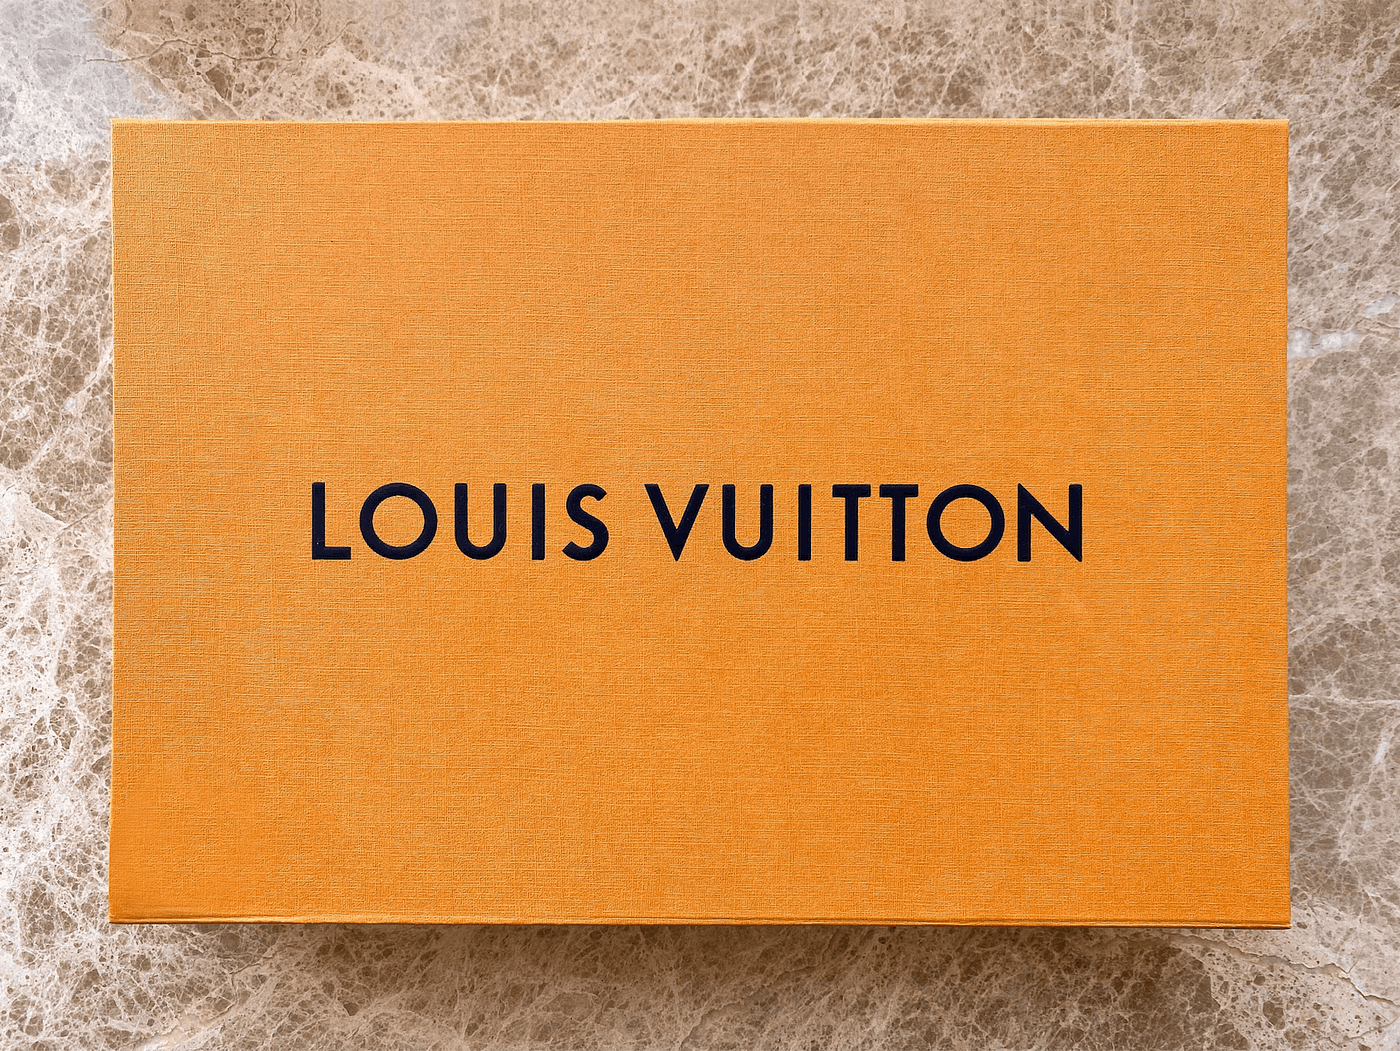 TOP 10 BEST Louis Vuitton Consignment nearby in New York, NY